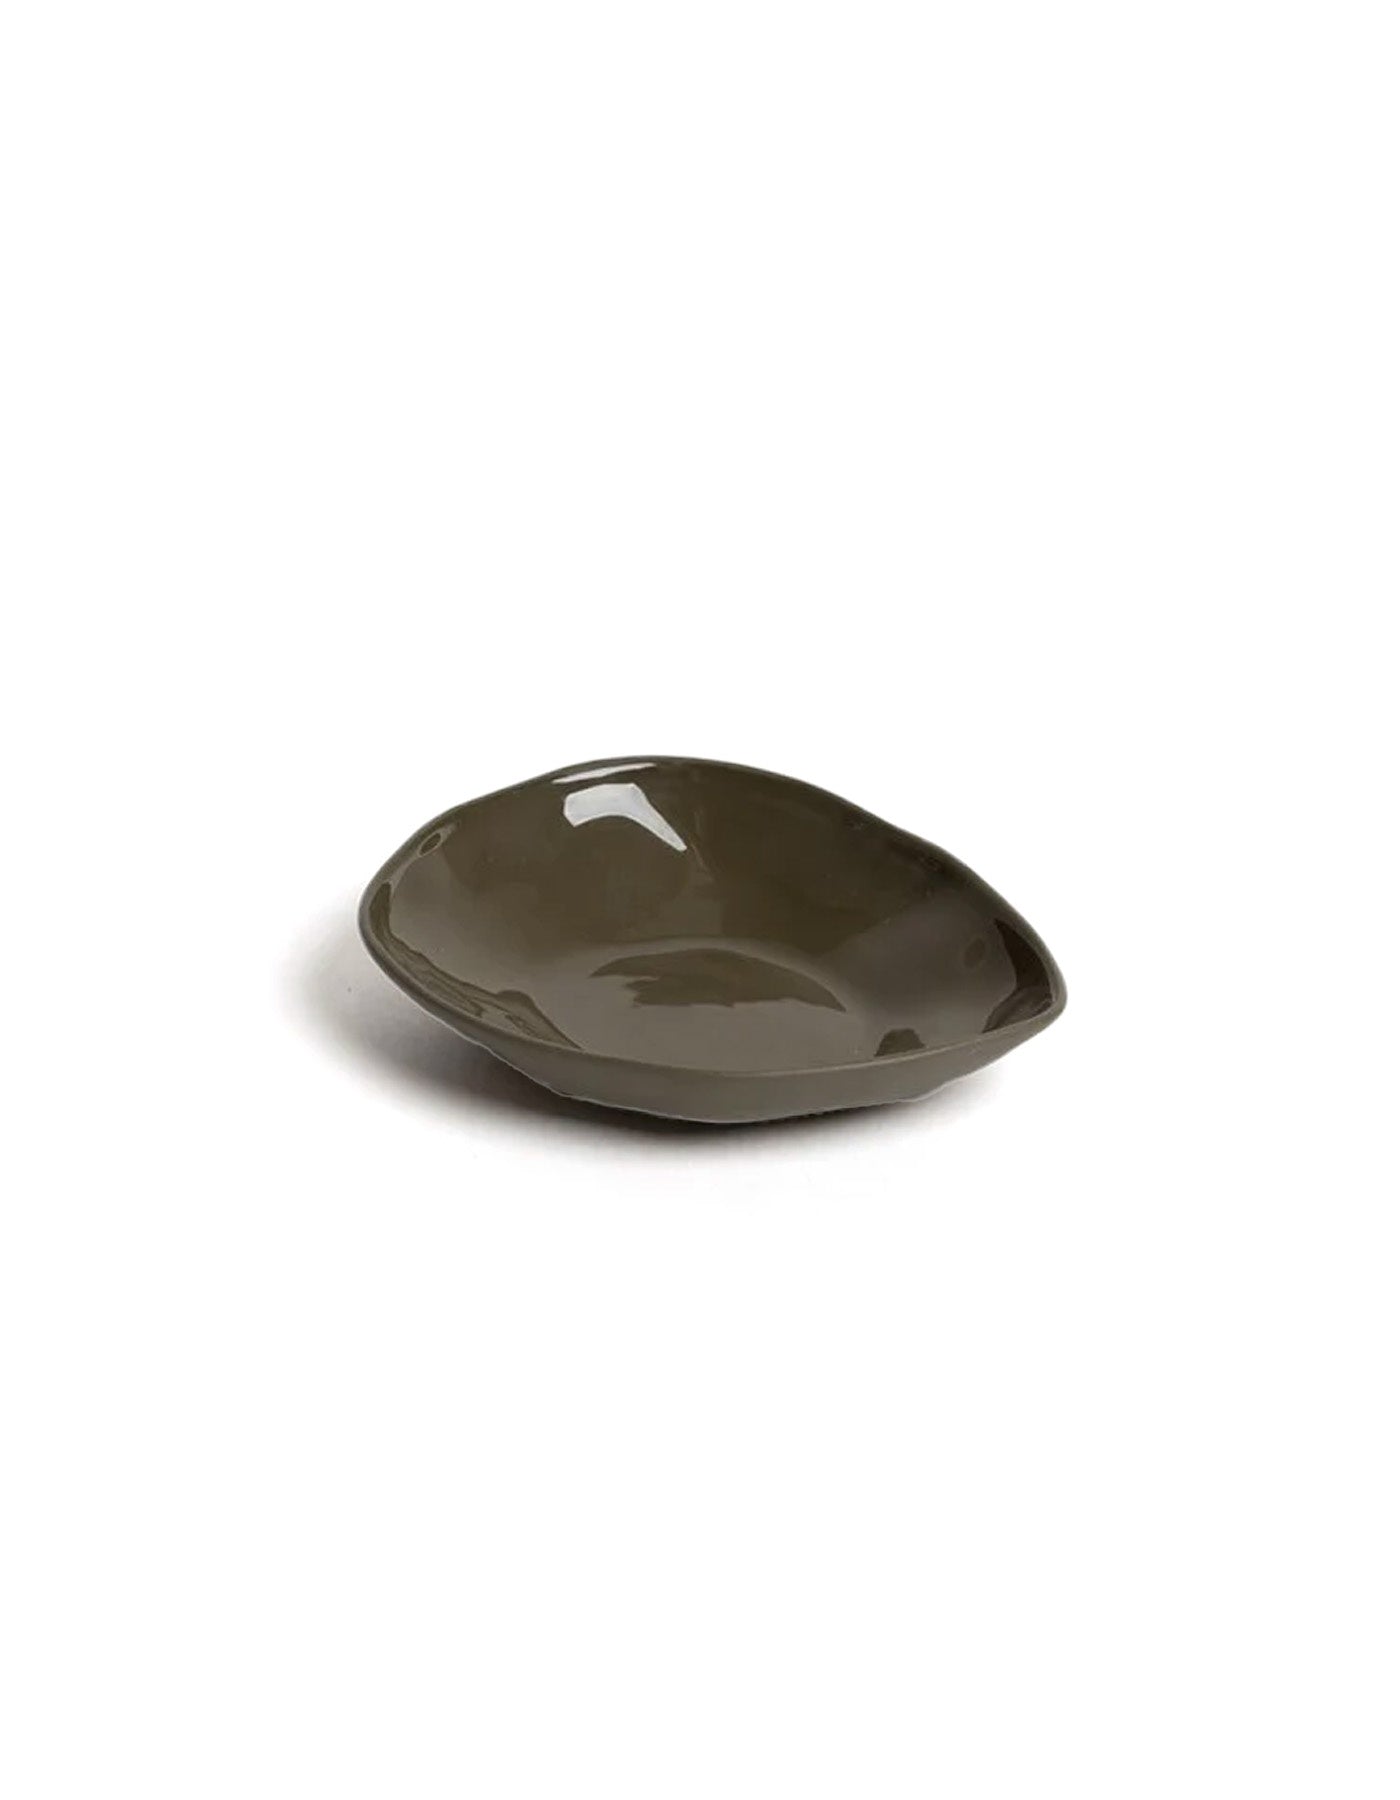 Ned Haan Condiment Dish Olive Green